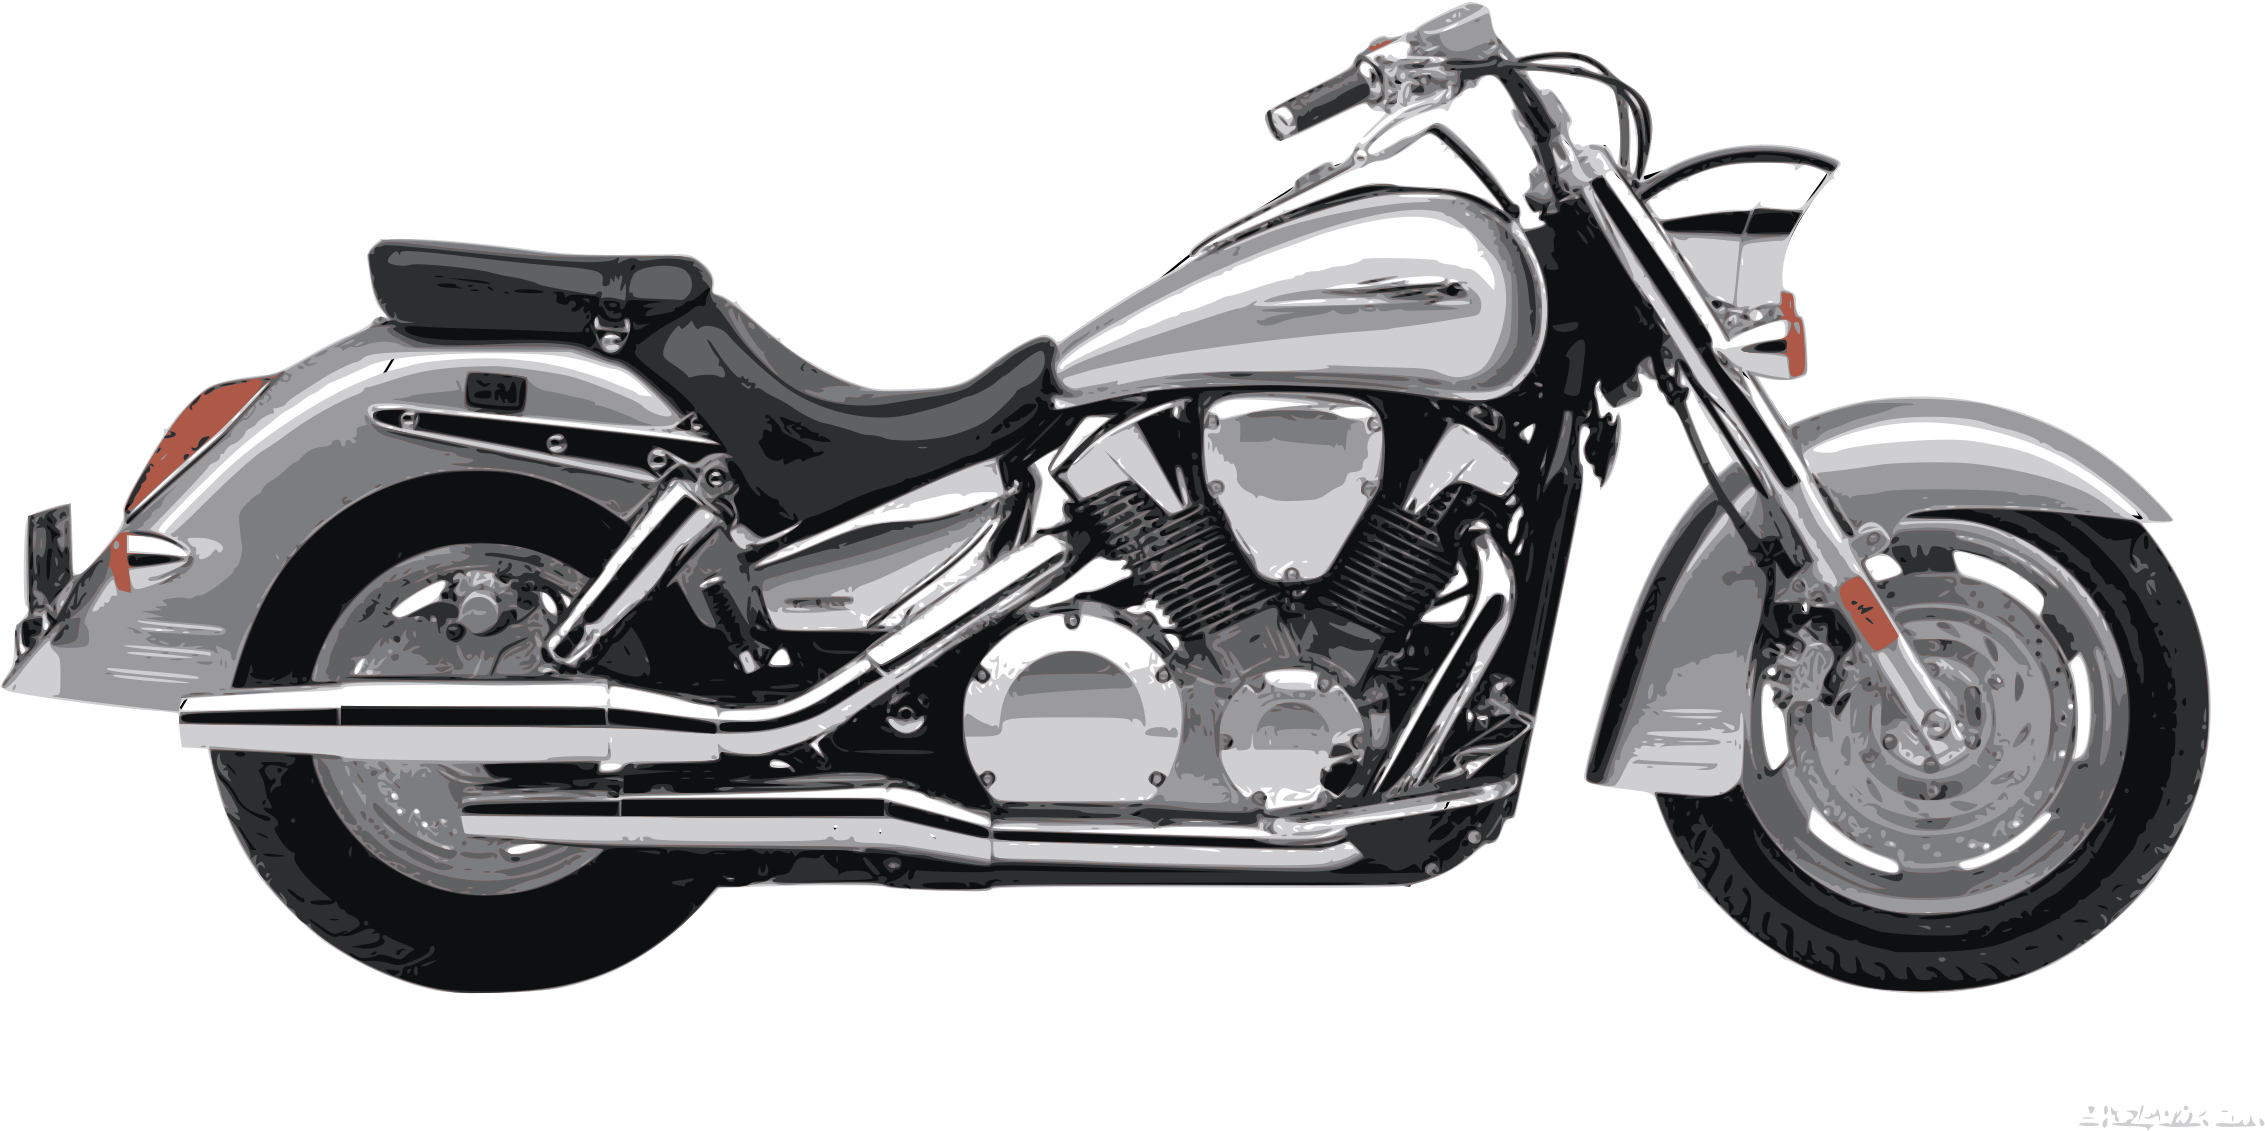 A Silver Motorcycle With Black Background